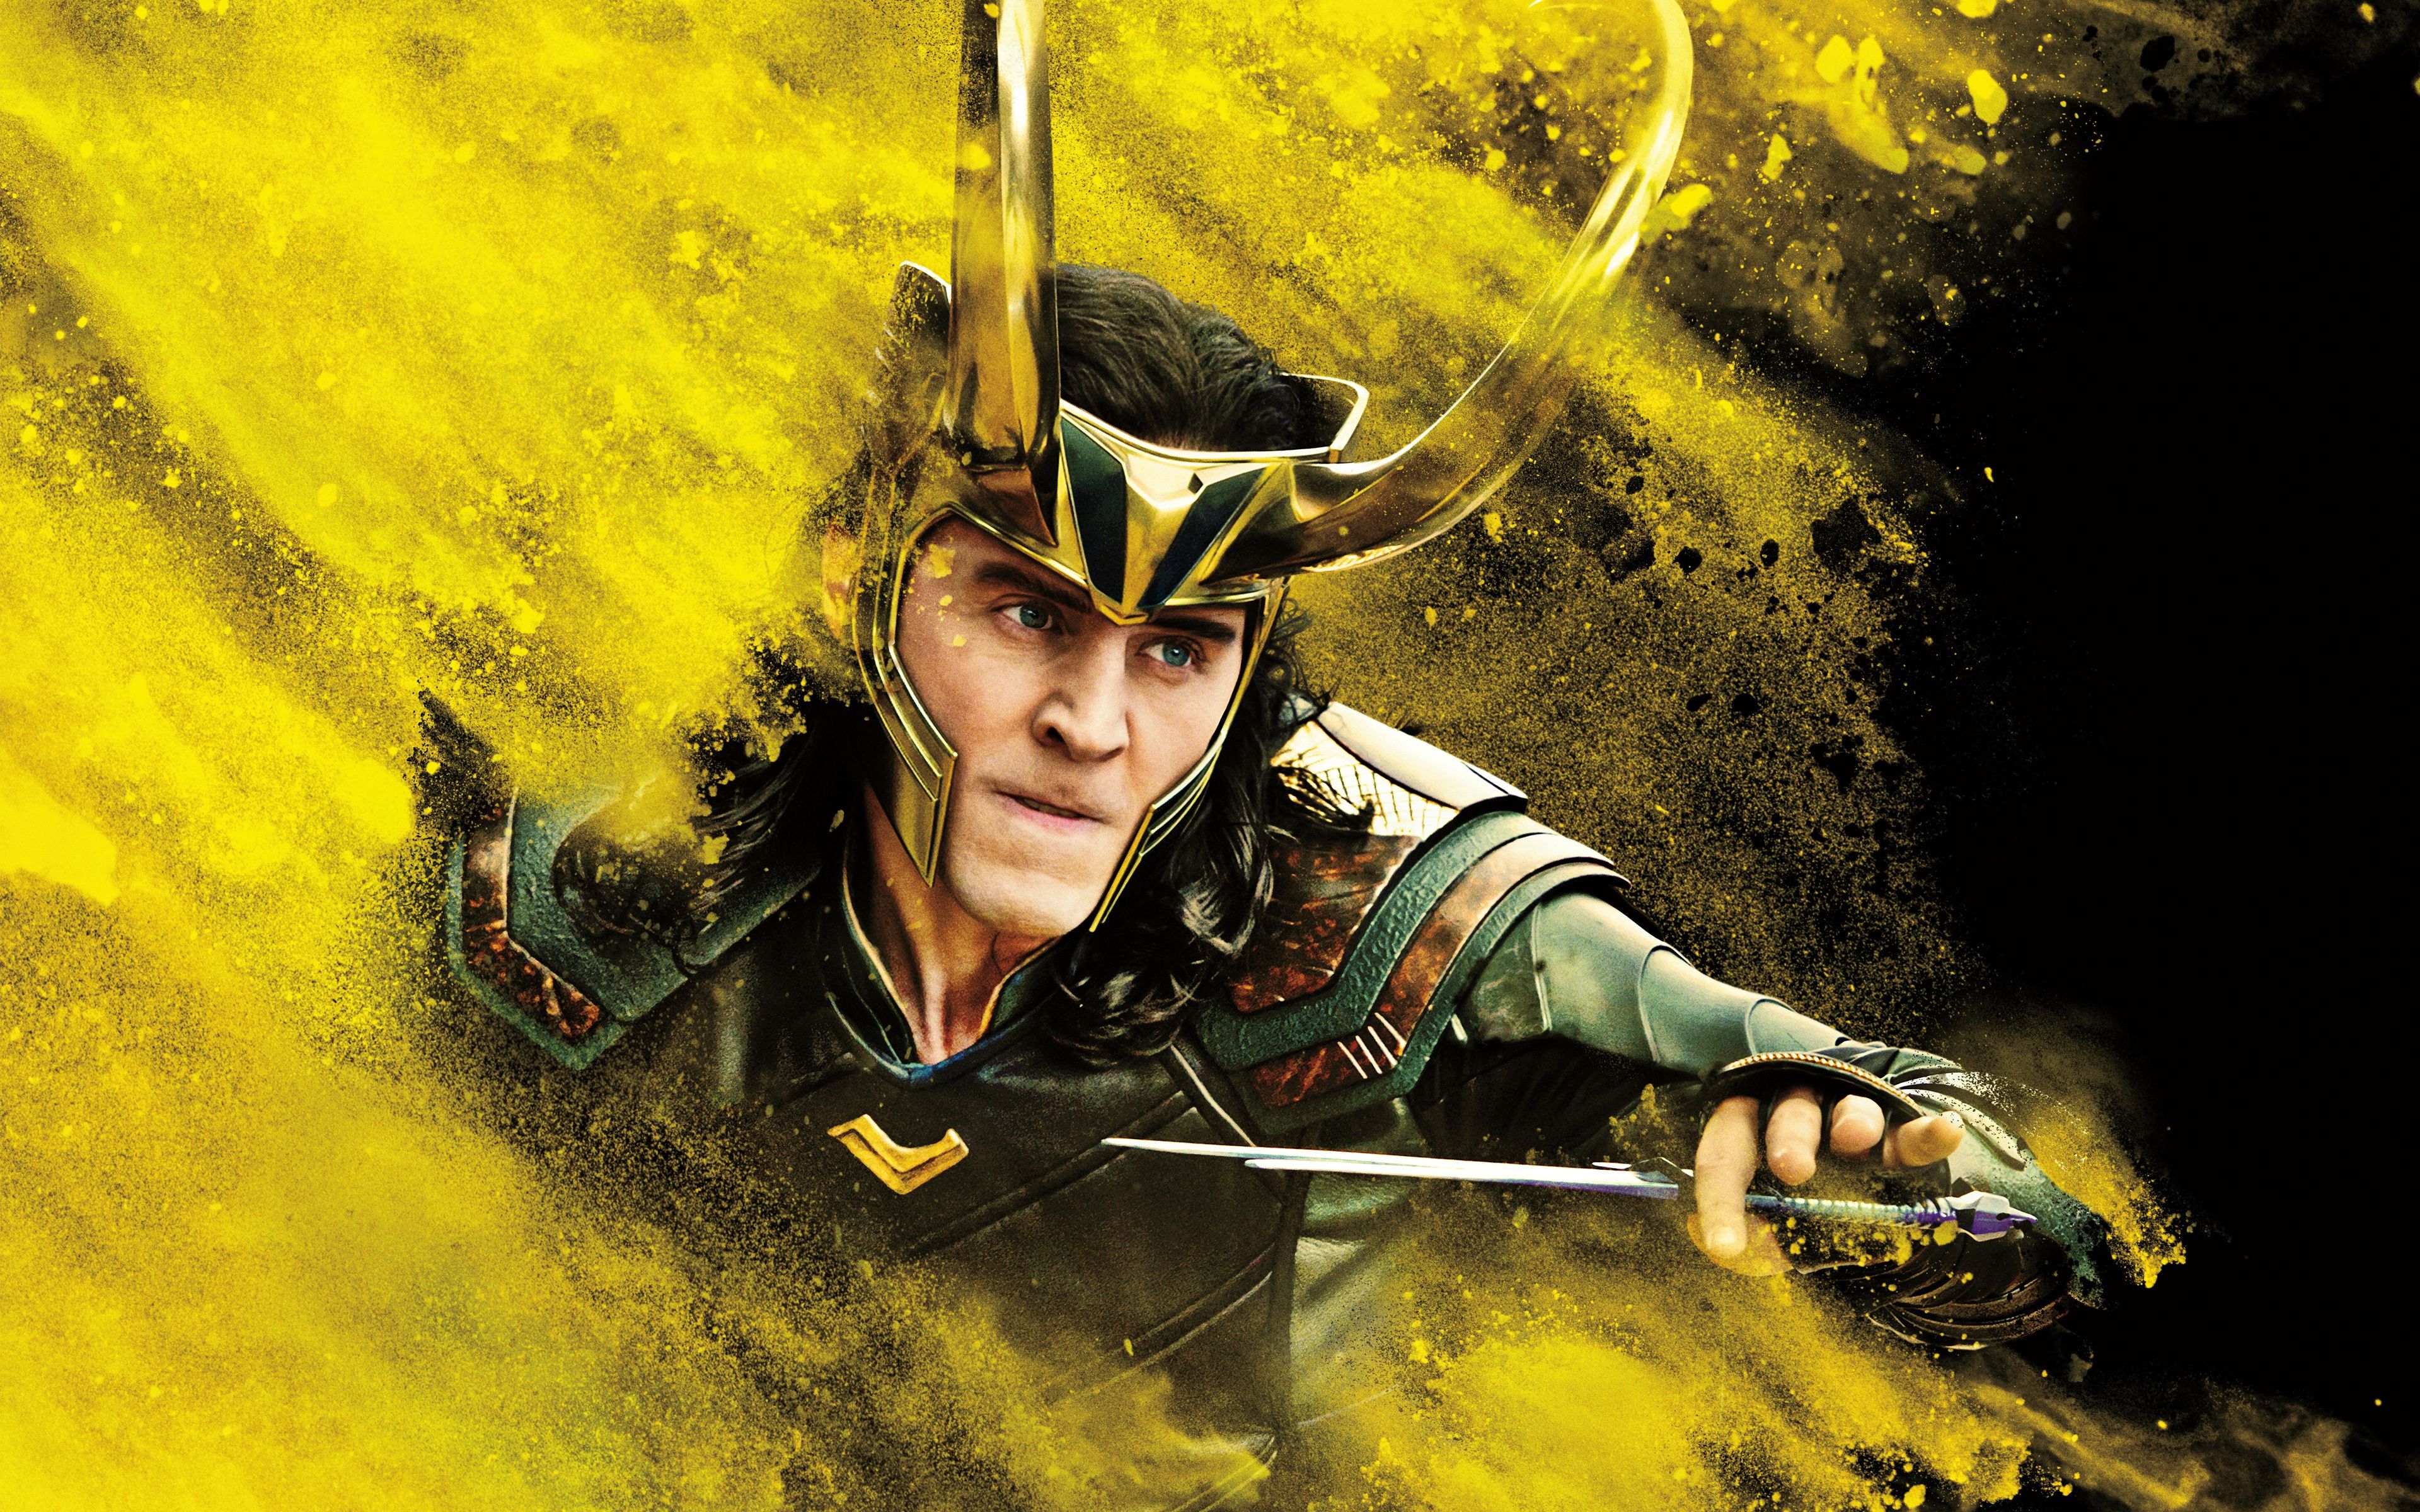 A man with horns holding two swords - Loki